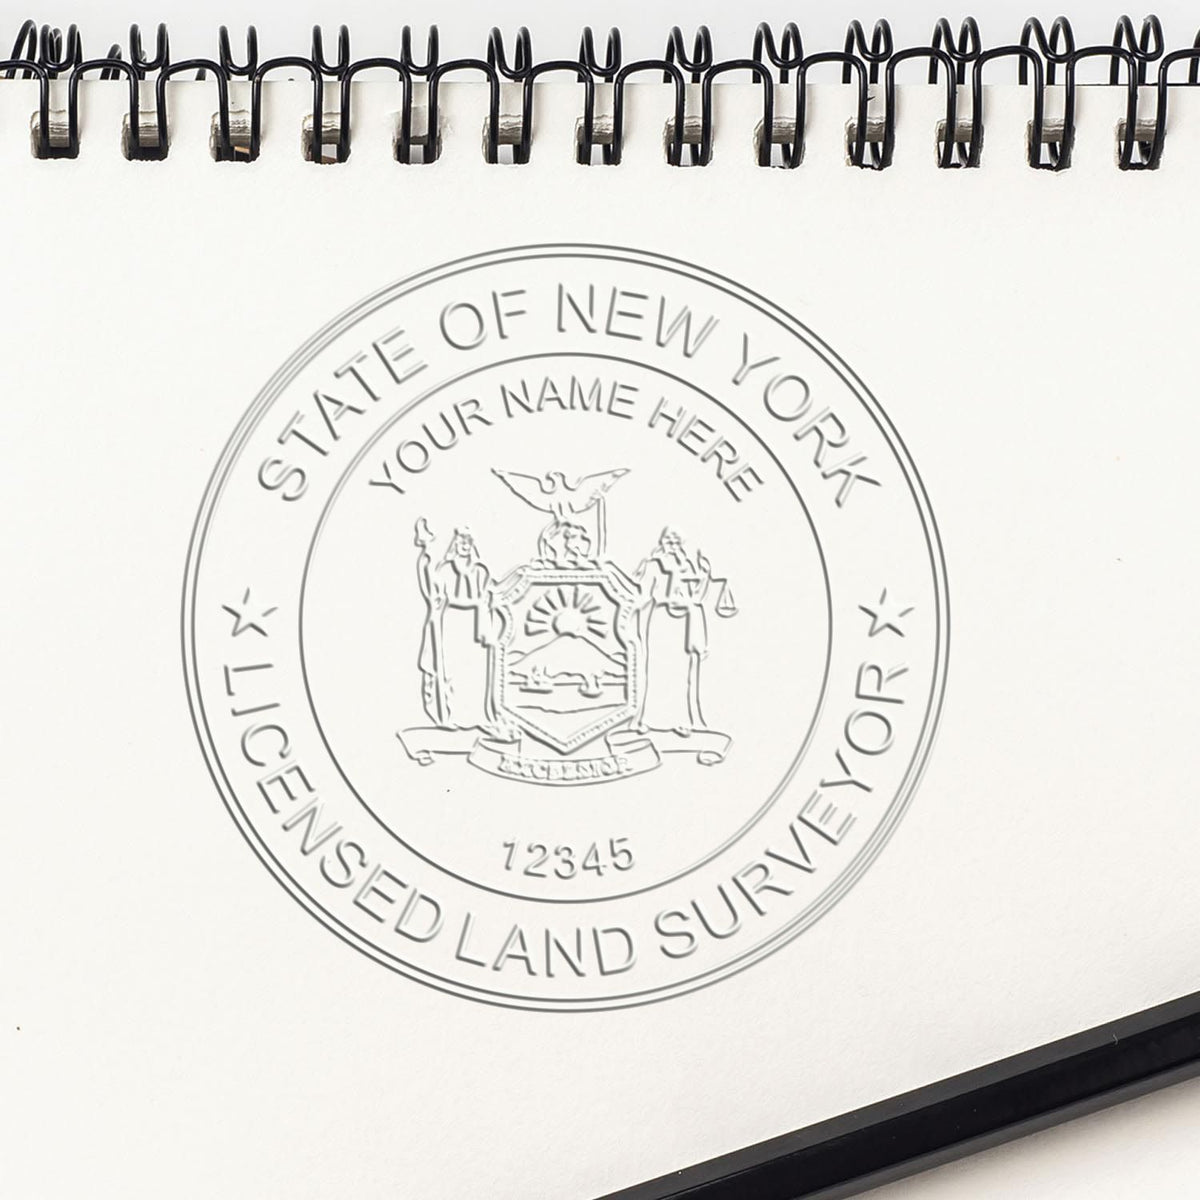 A stamped imprint of the Gift New York Land Surveyor Seal in this stylish lifestyle photo, setting the tone for a unique and personalized product.